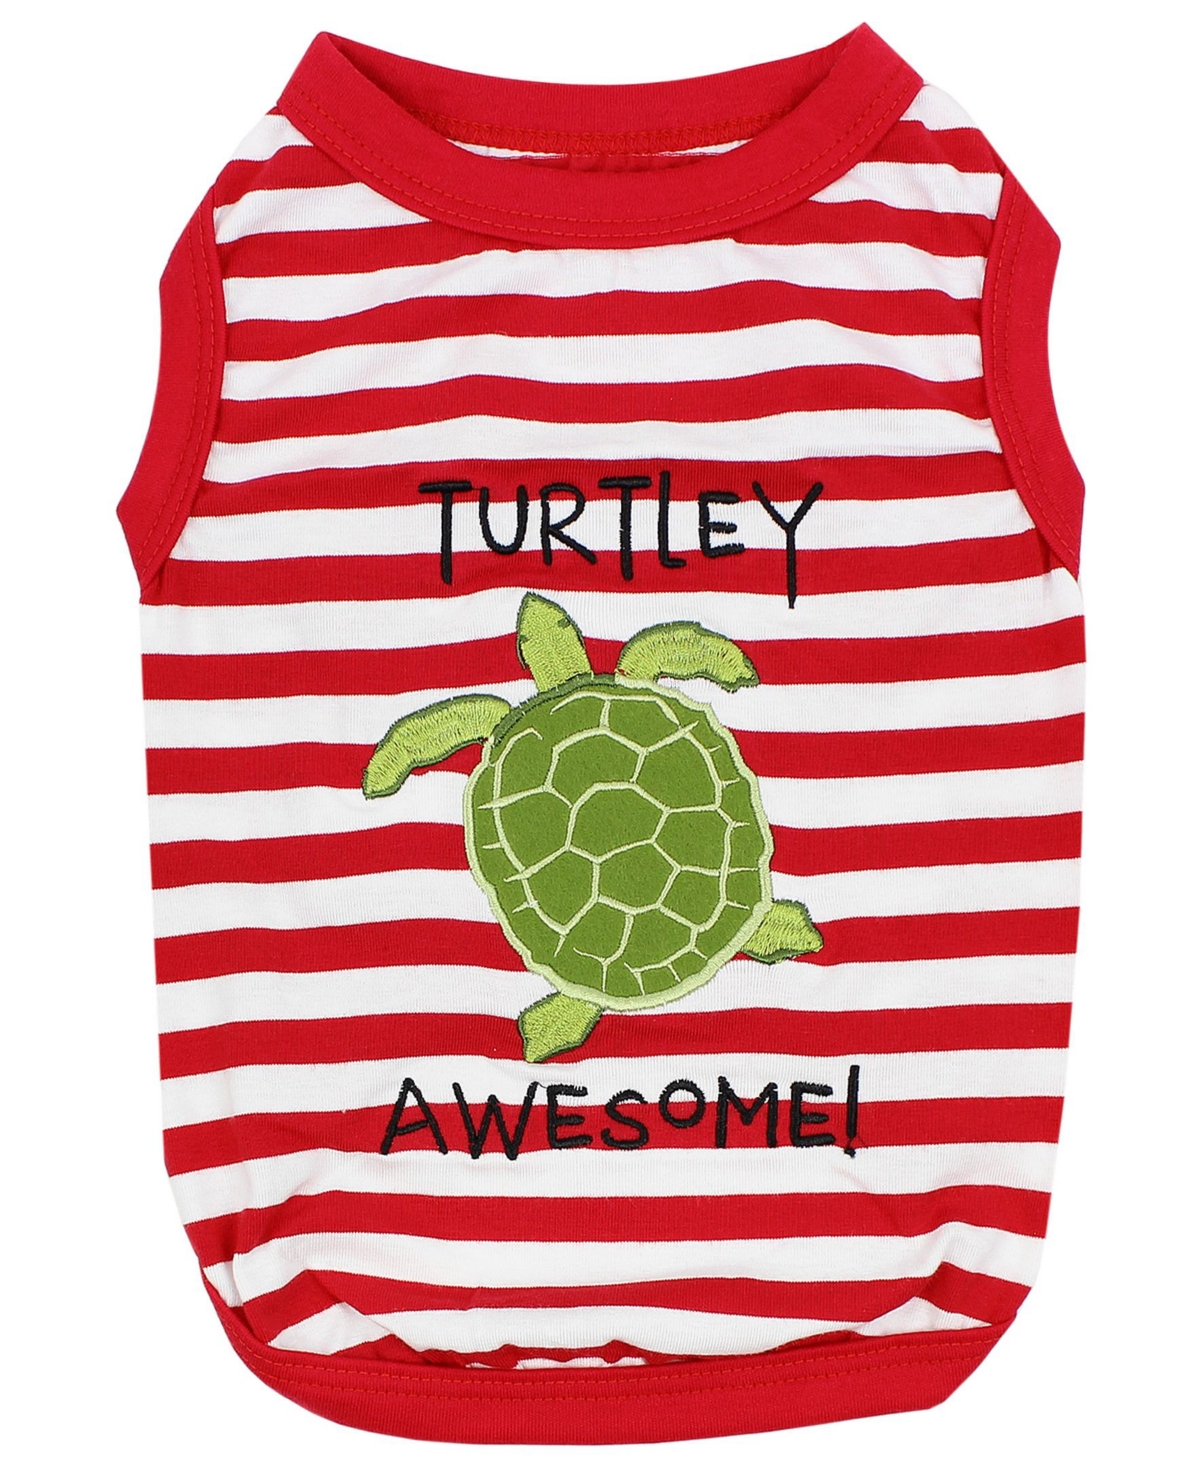 Turtle Tee Dog T-Shirt - Red